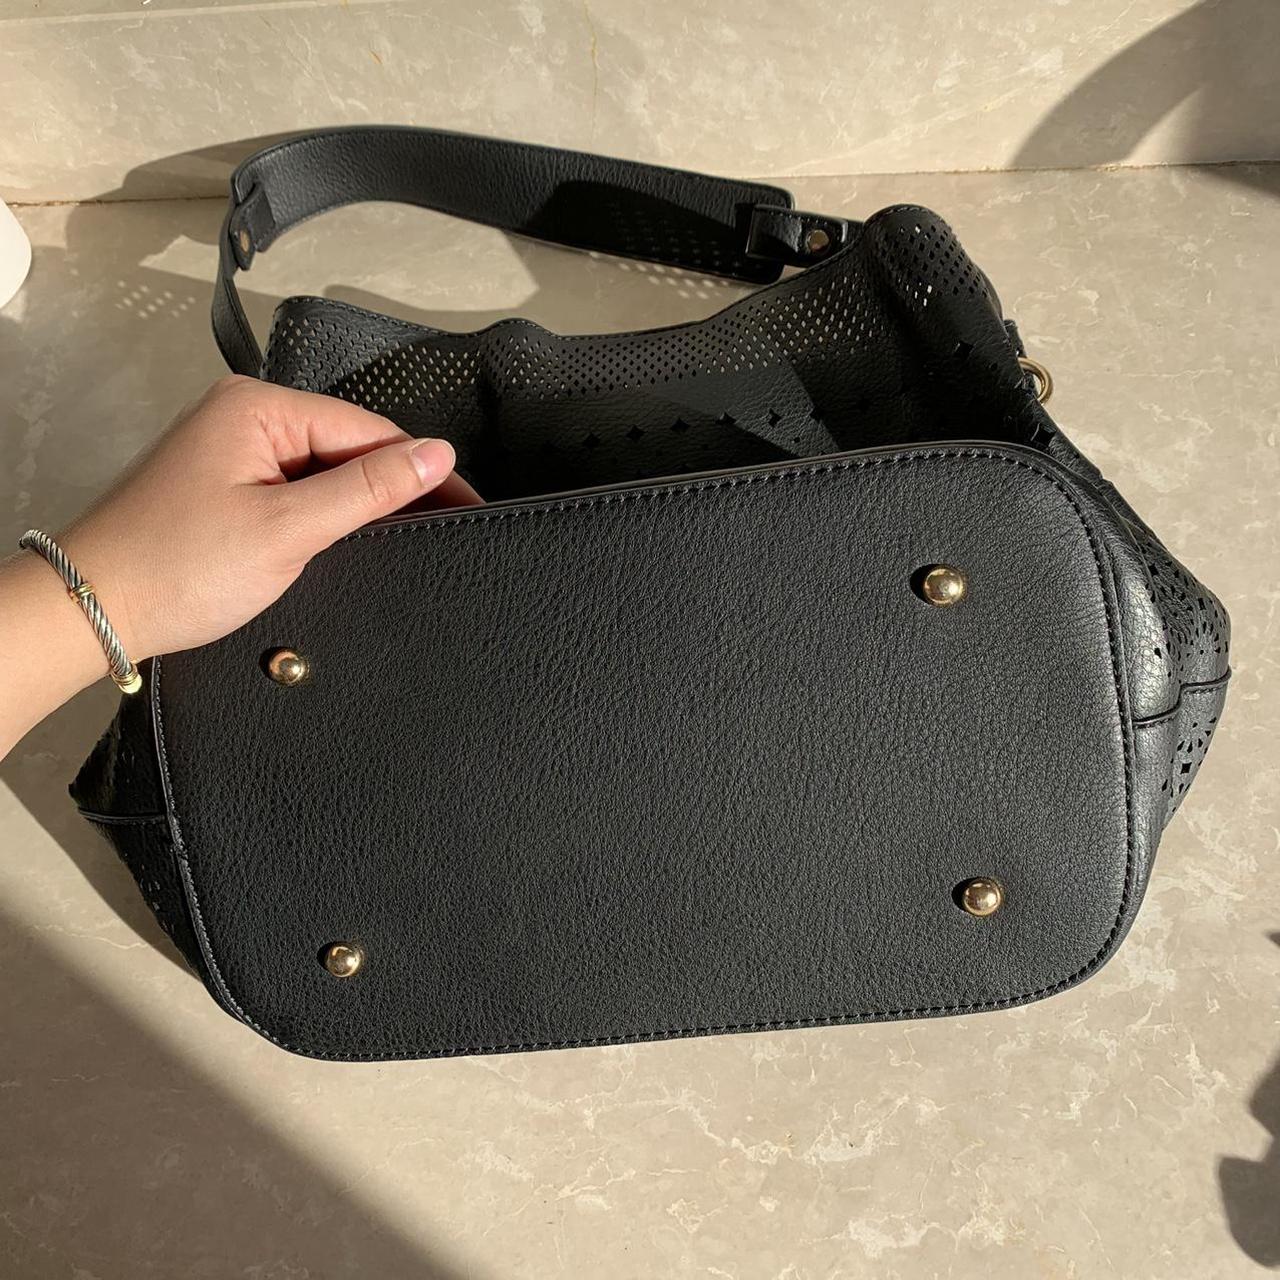 Product Image 4 - 🖤LASER-CUT LEATHER BAG!🖤
Beautiful black leather